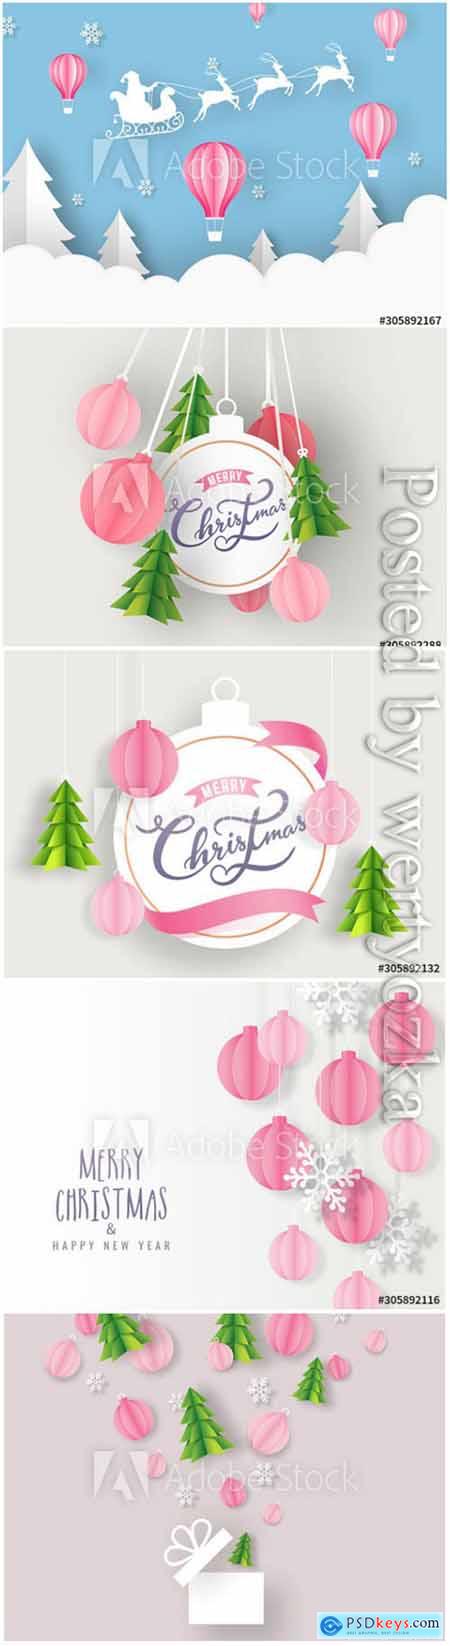 Merry Christmas decorated with paper in vector